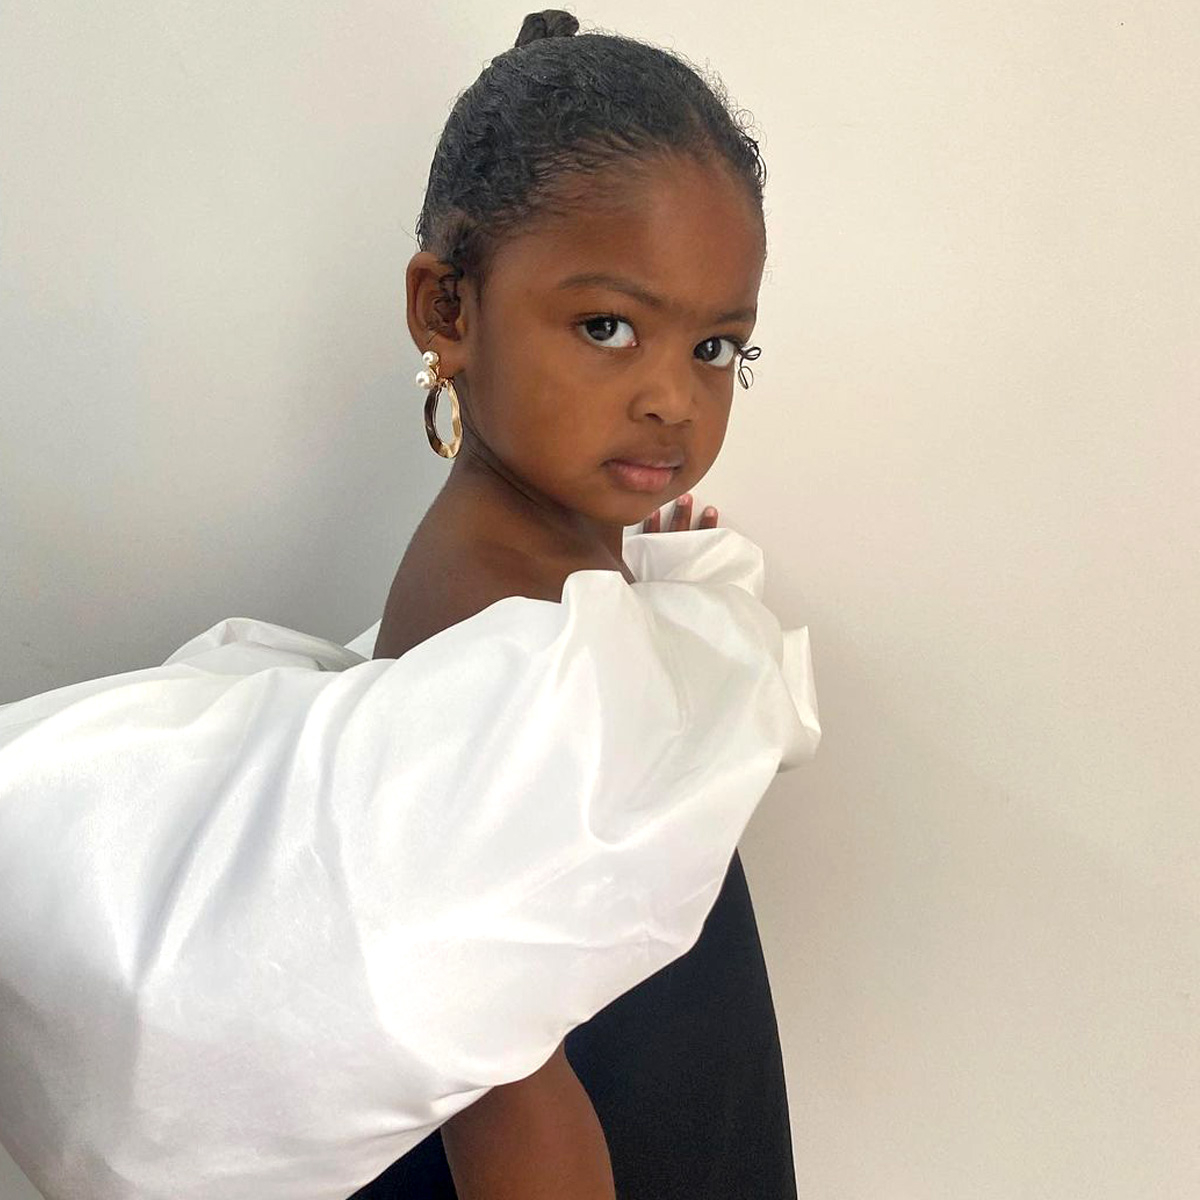 See Gabrielle Union's daughter's spot-on Adele Halloween costume